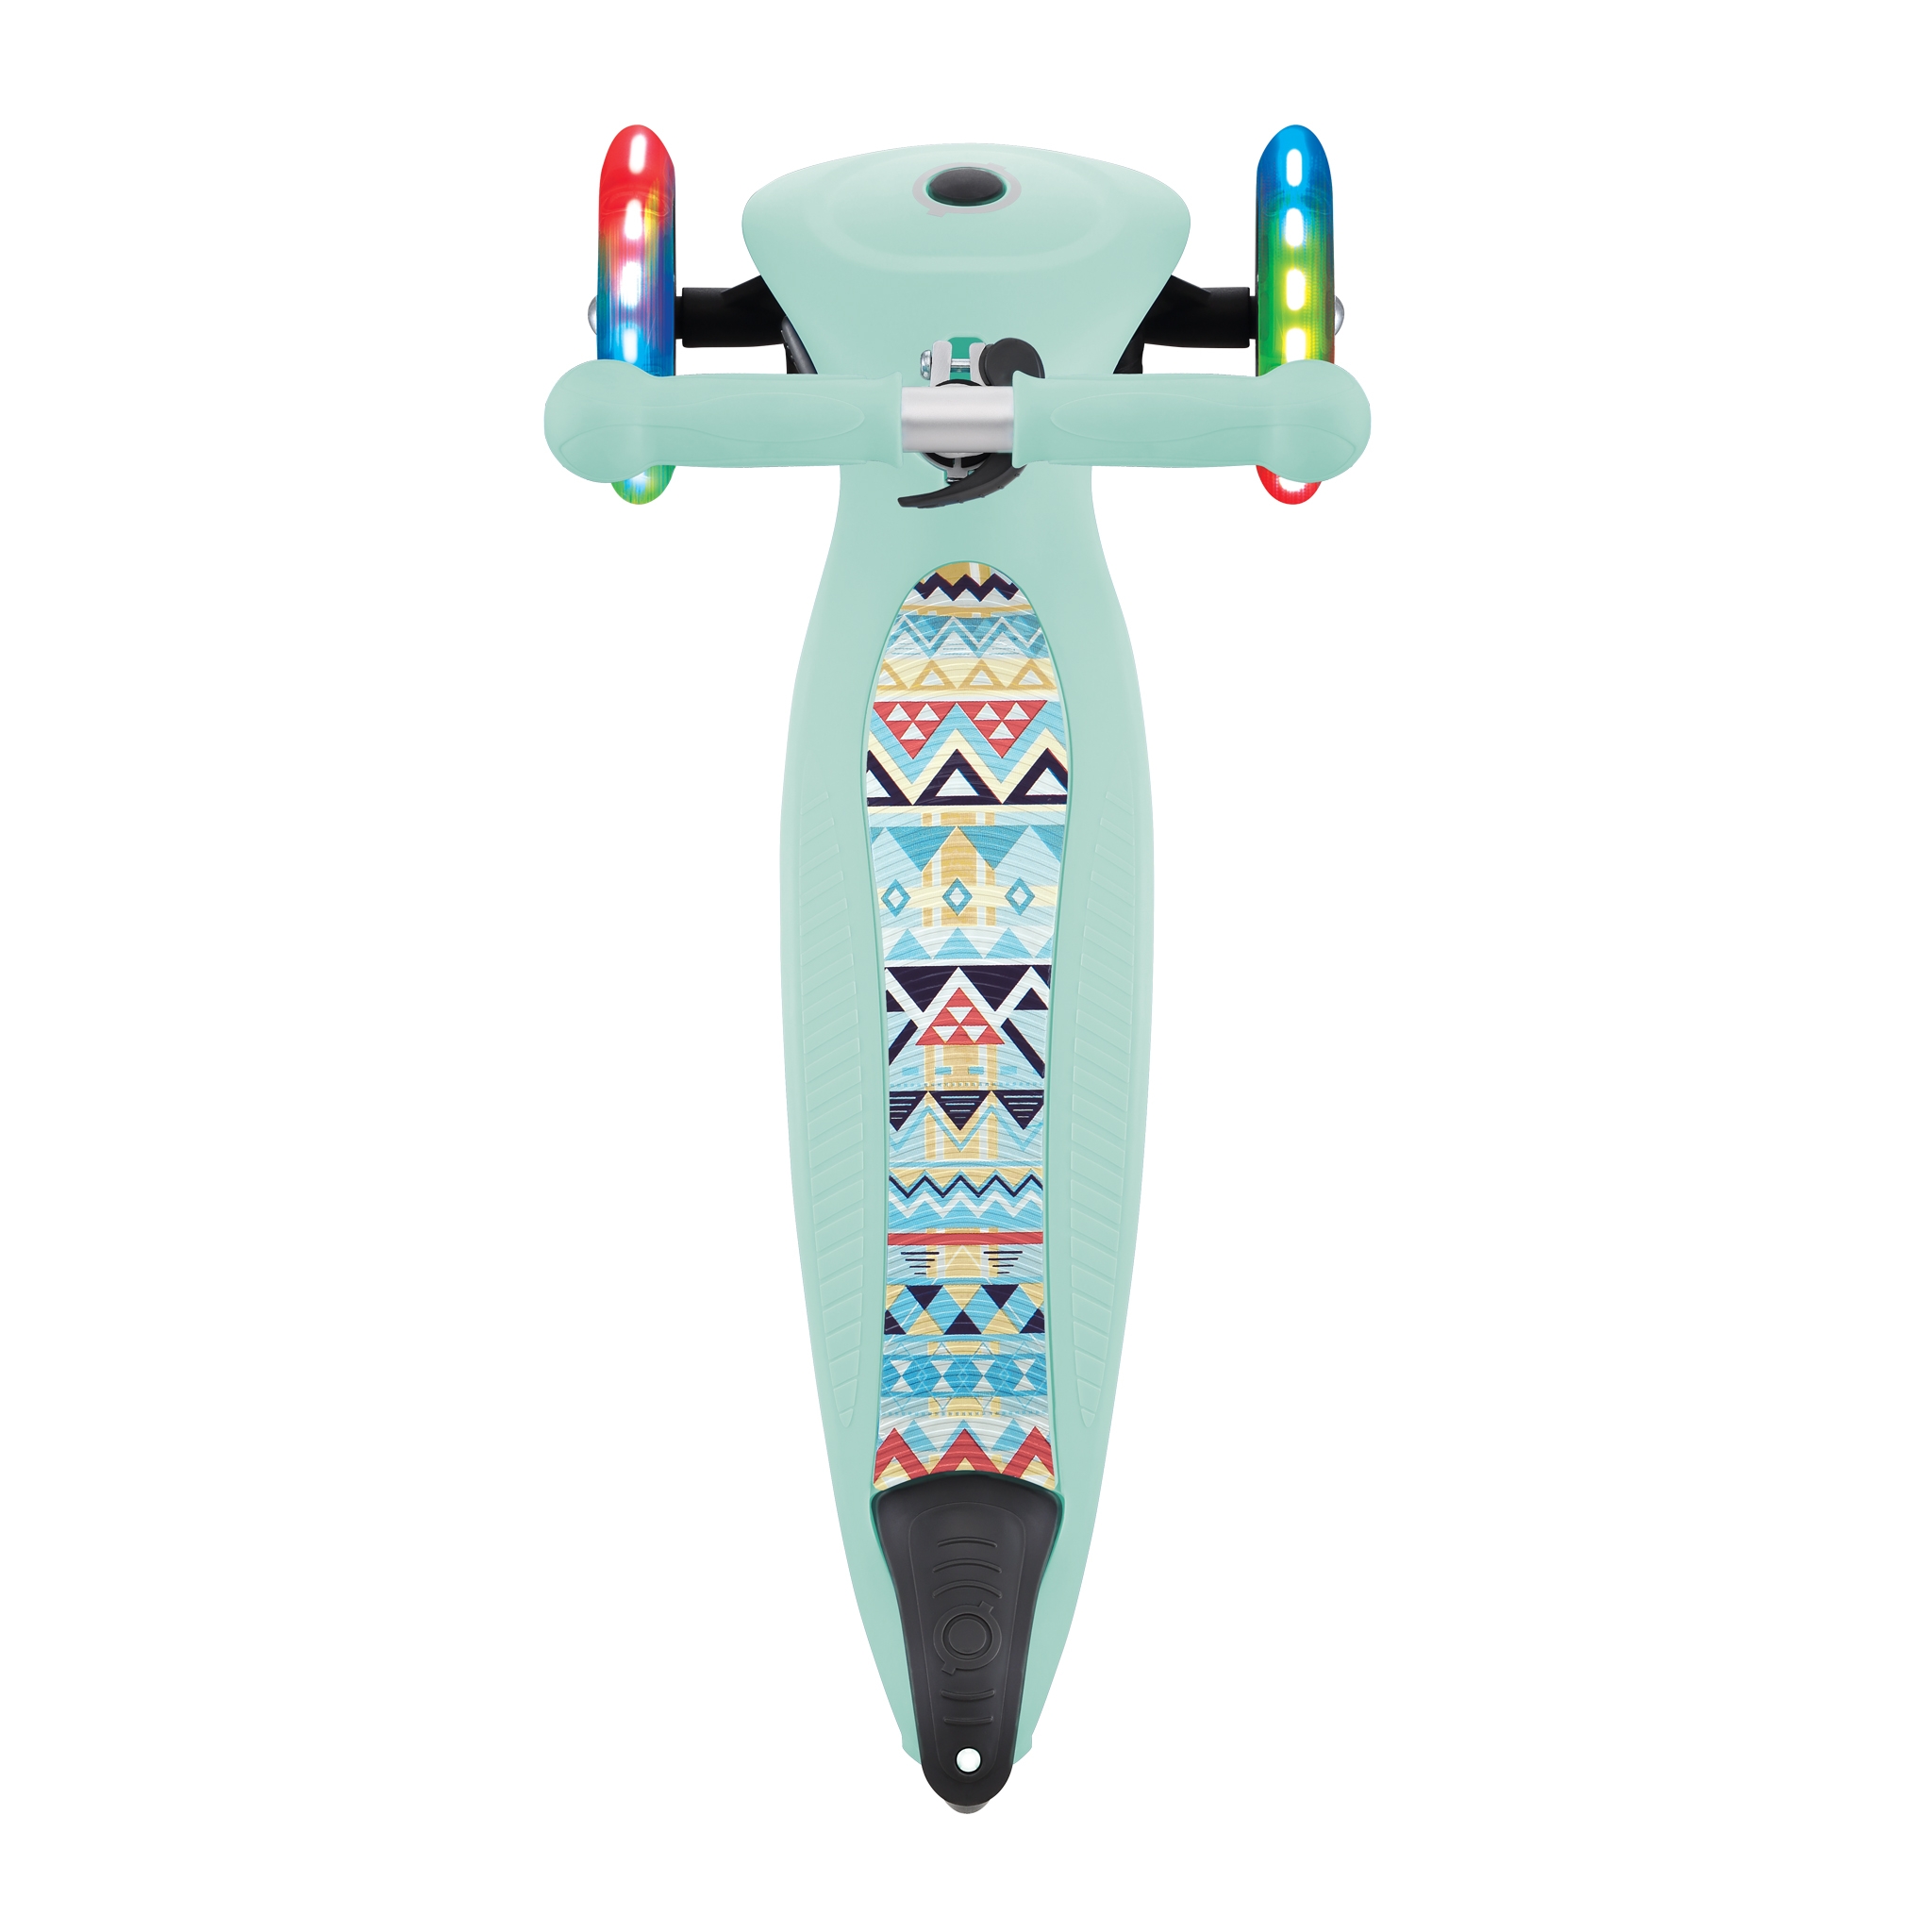 3-wheel-scooter-for-2-year-olds-with-fun-scooter-deck-pattern-Globber-JUNIOR-FOLDABLE-FANTASY-LIGHTS 3